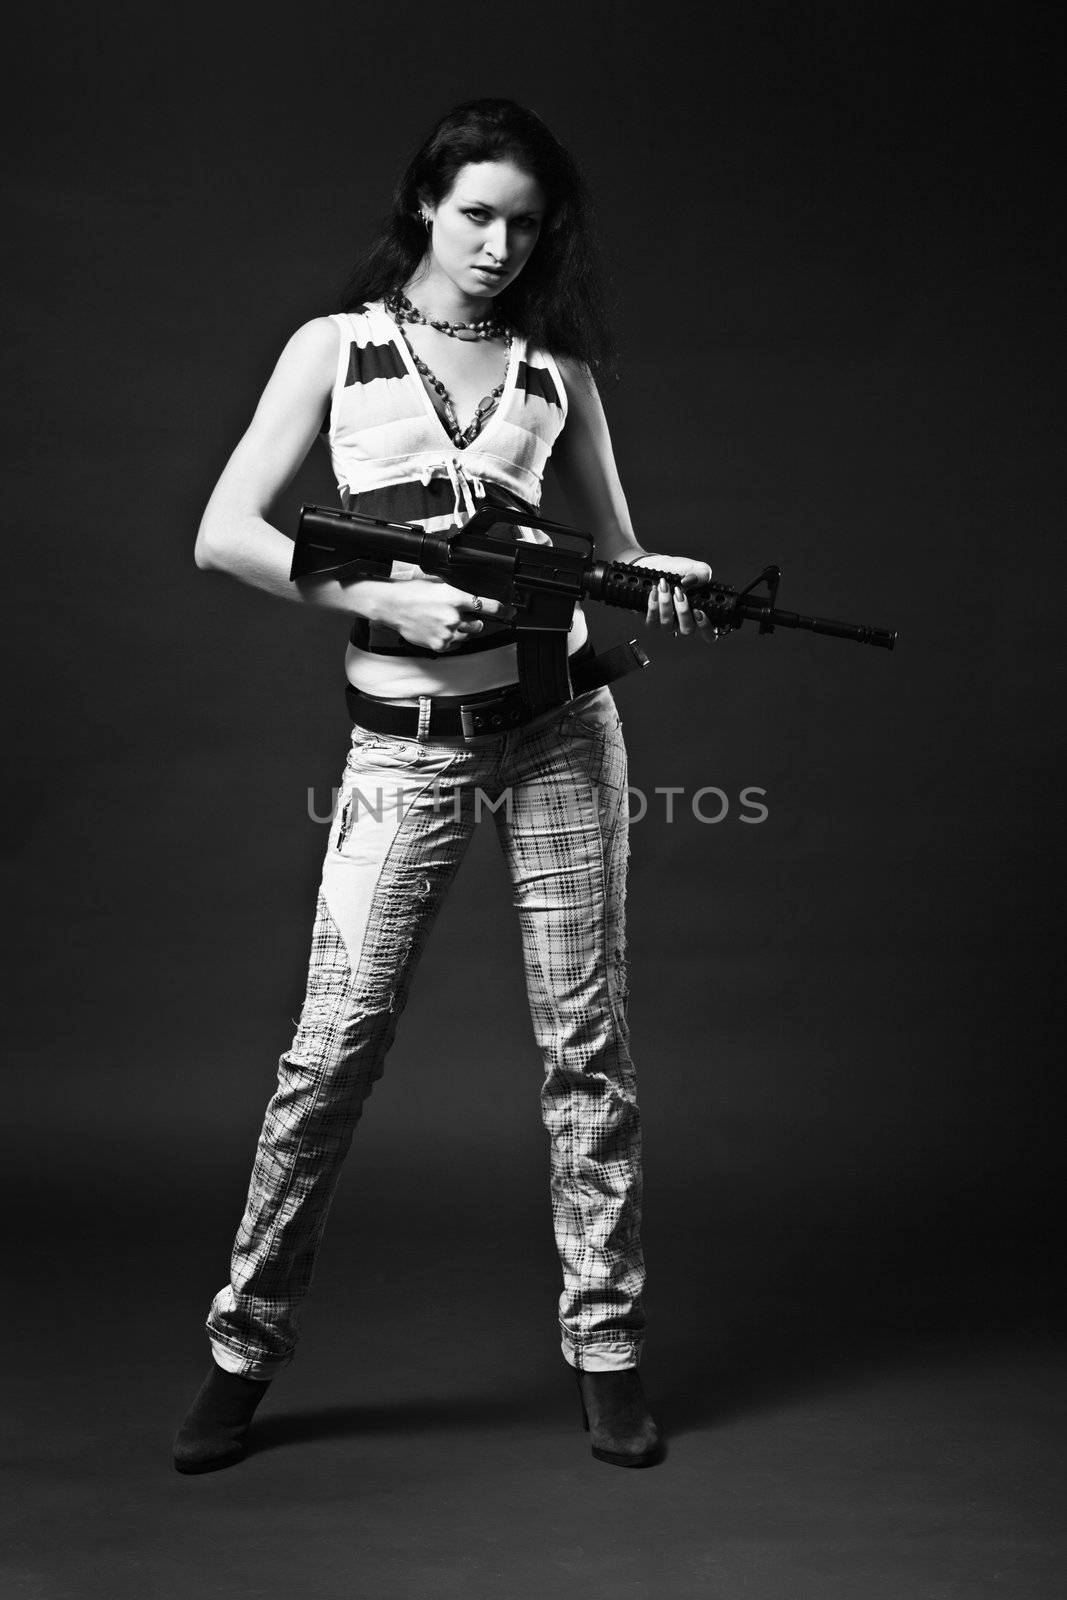 A girl holding a rifle - a contrast monochrome picture